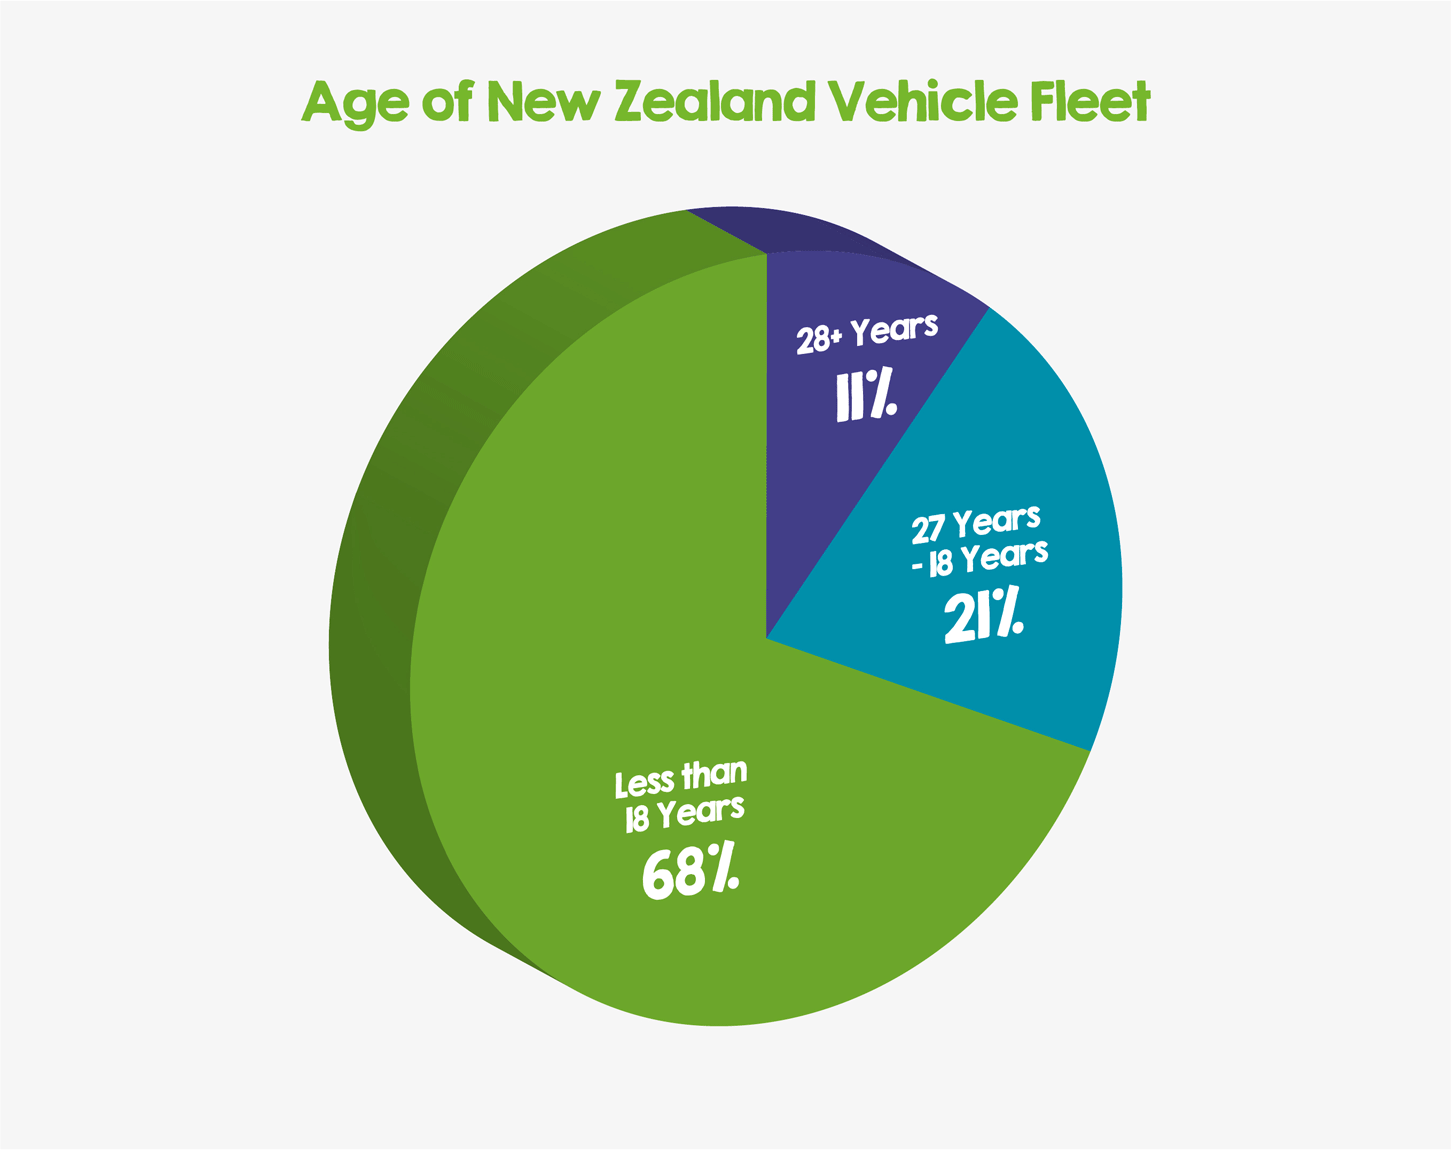 Pie chart showing the age of vehicles increases the further south you go in New Zealand